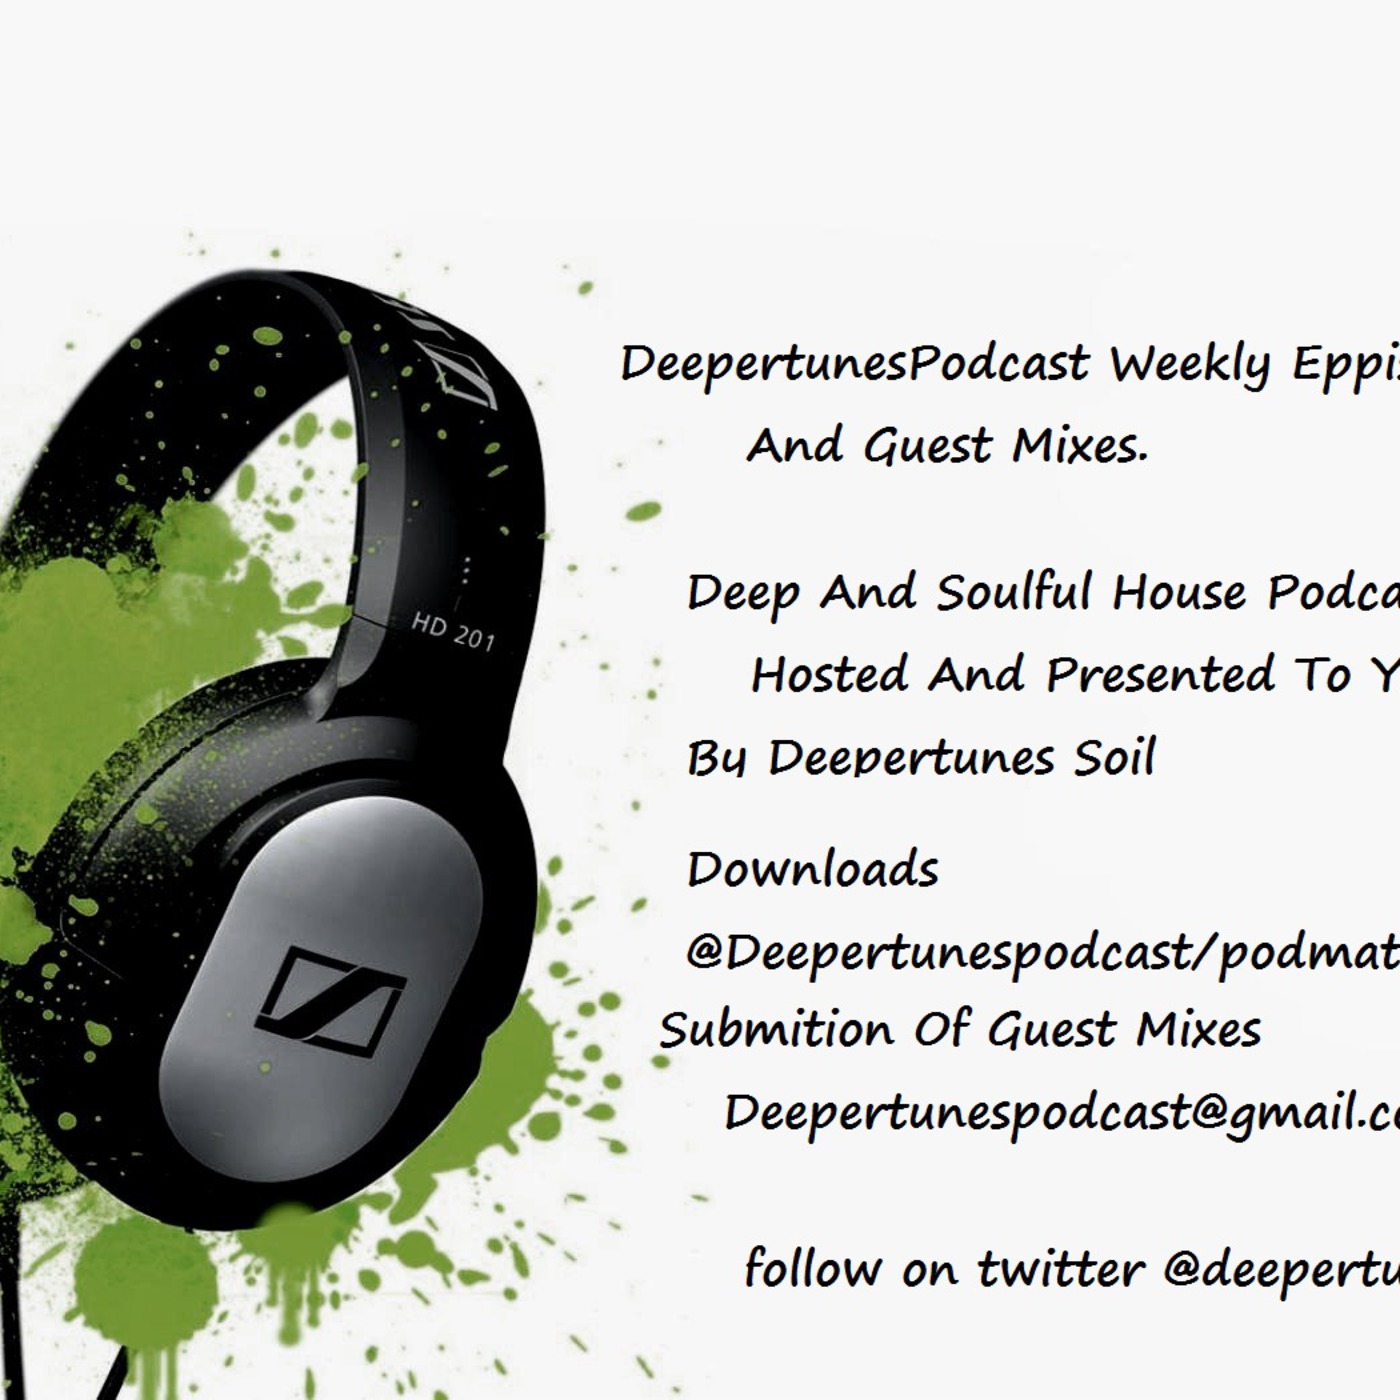 DeepertunesPodcast Presents Eppisode 5 The Soulful In Take Part 2 Mix by Deepertunes Soil